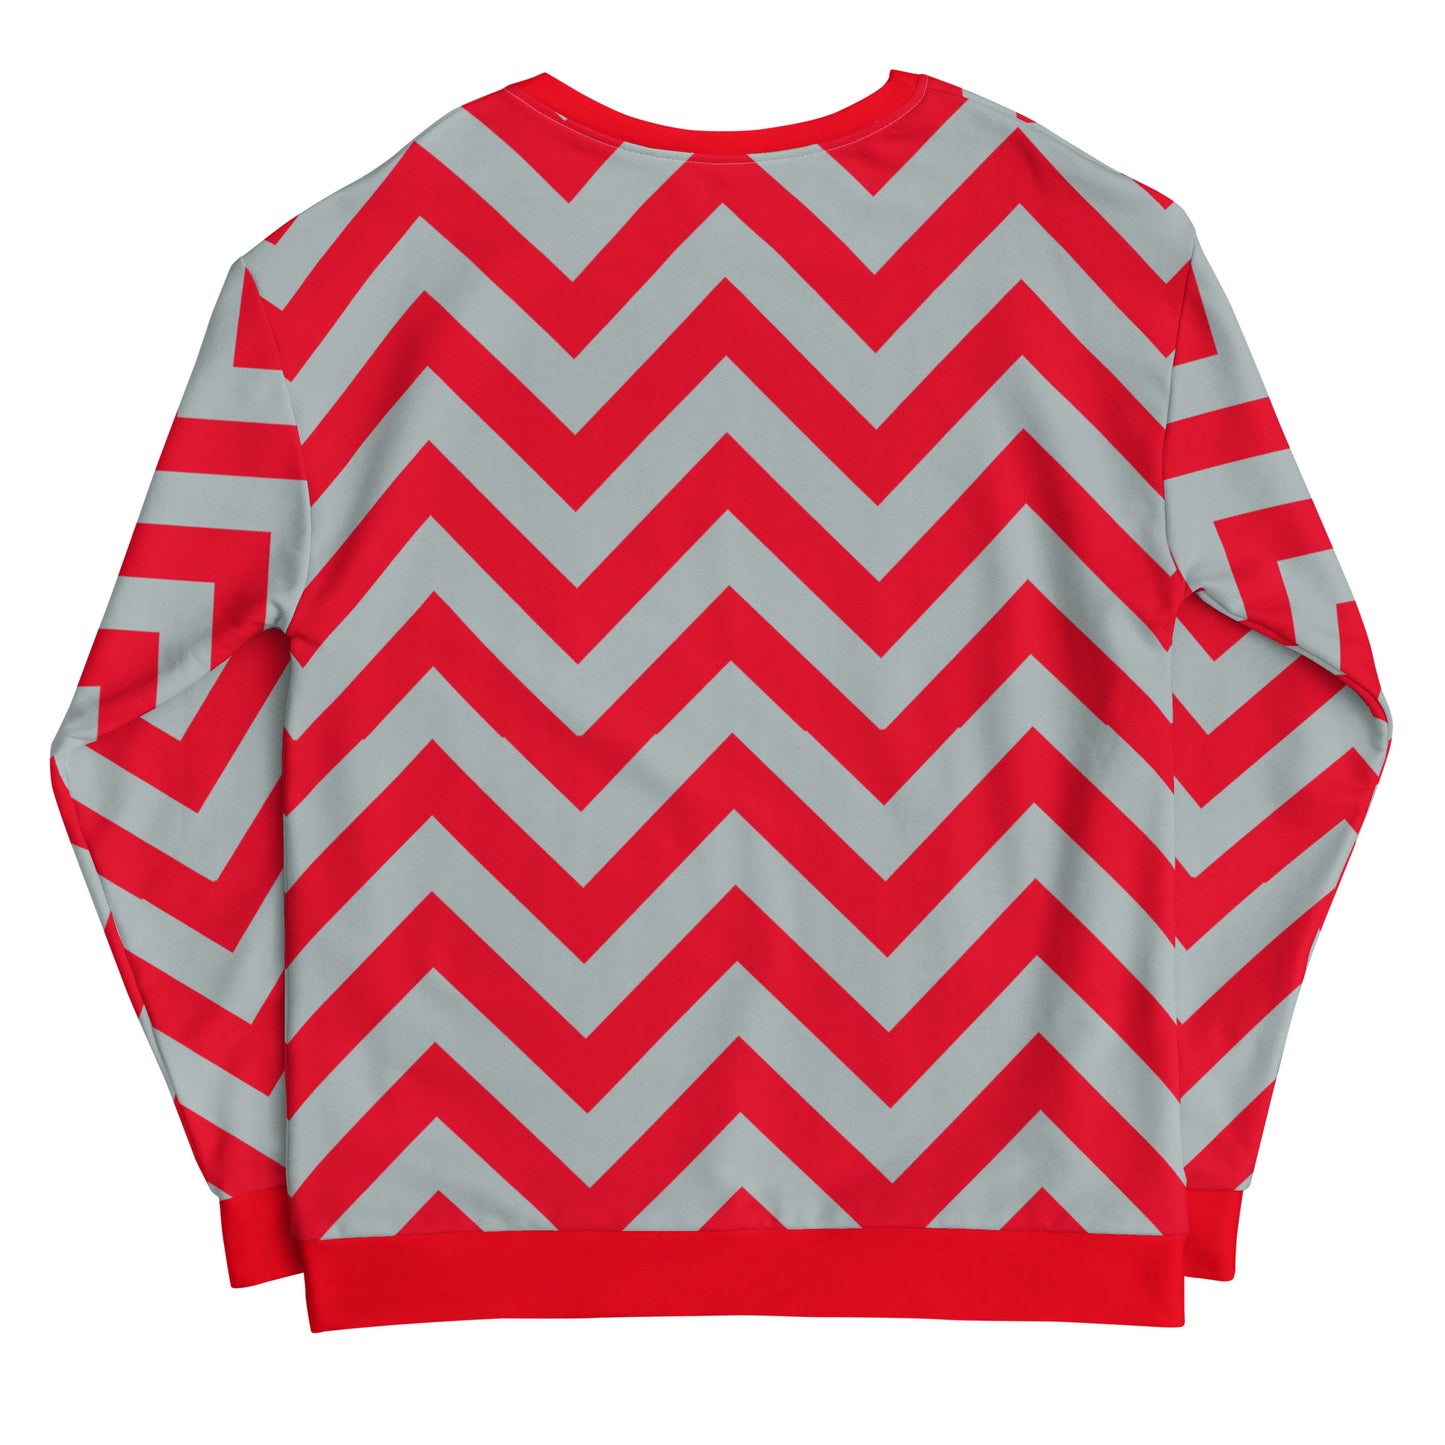 Zigzag - Inspired By Harry Styles - Sustainably Made Sweatshirt